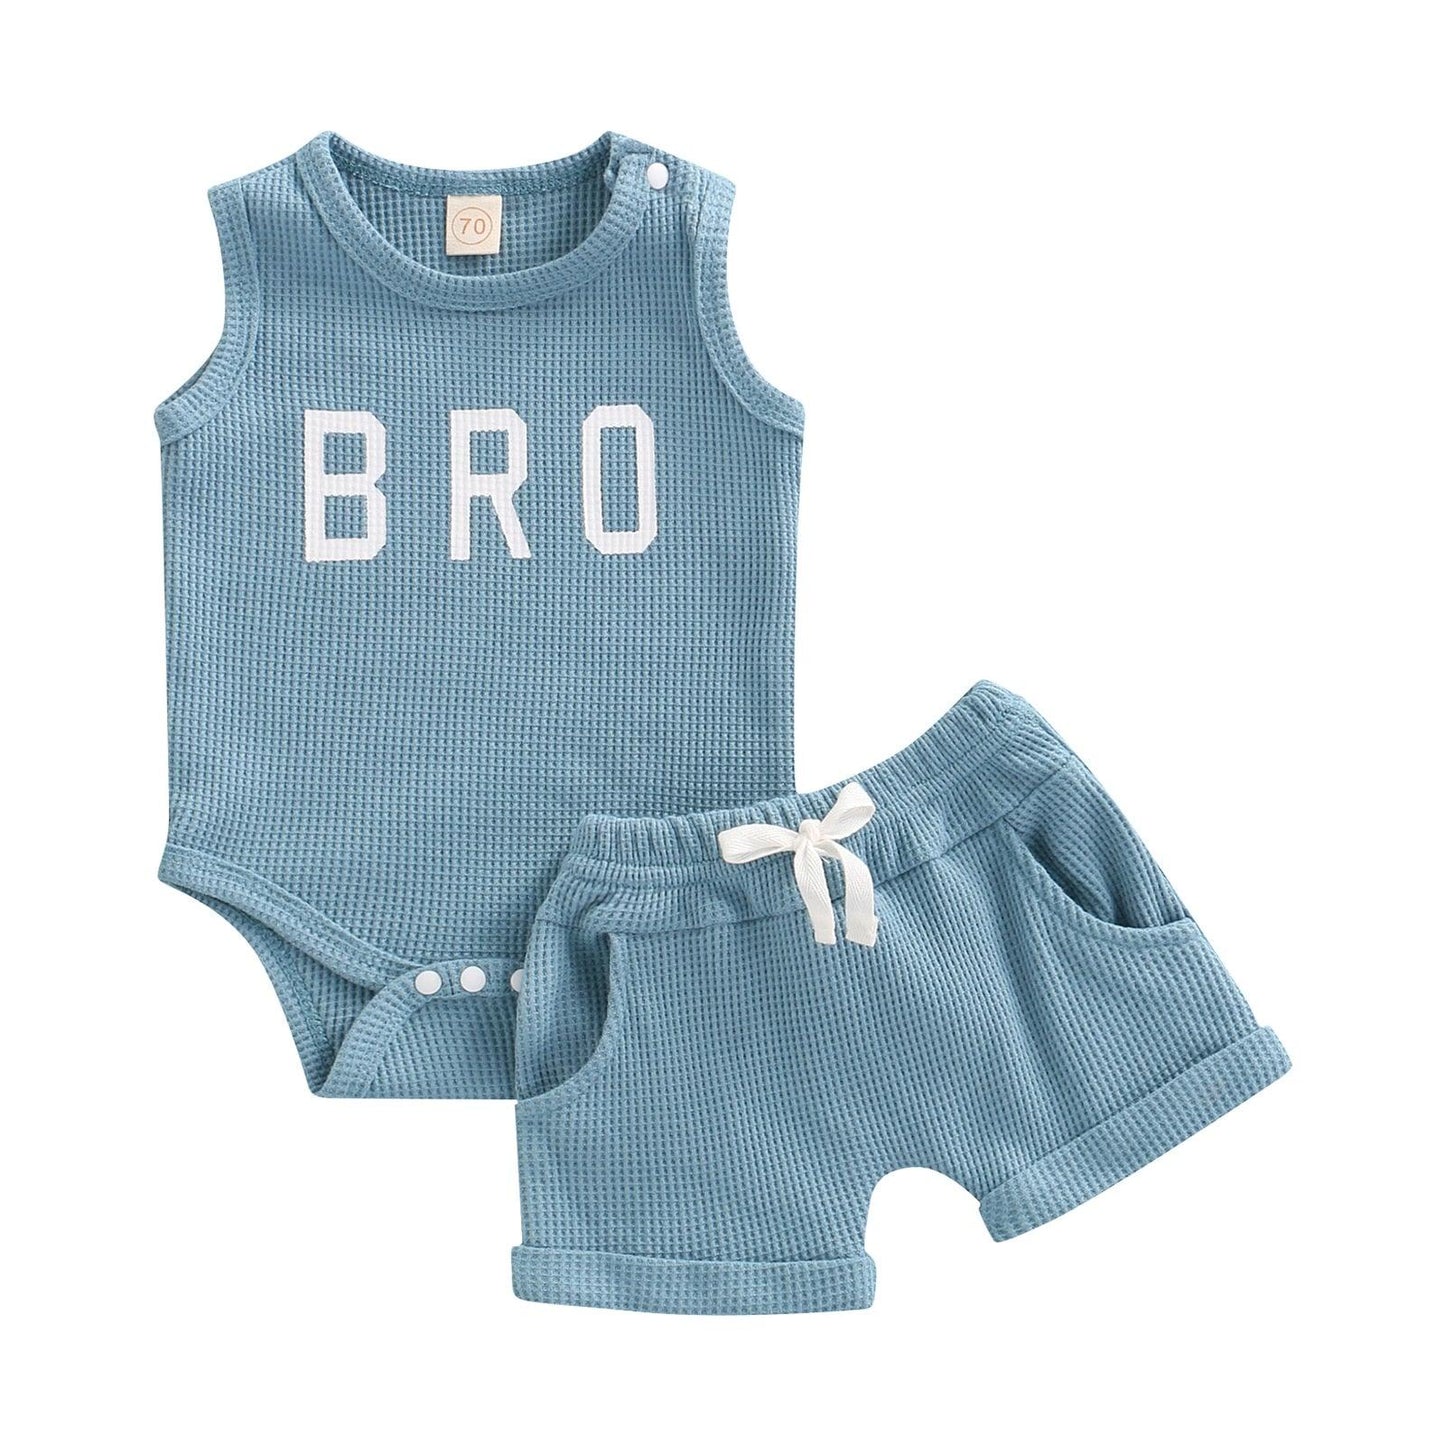 Bro Print Waffle Knit Romper Outfit - Shop Baby Boutiques 